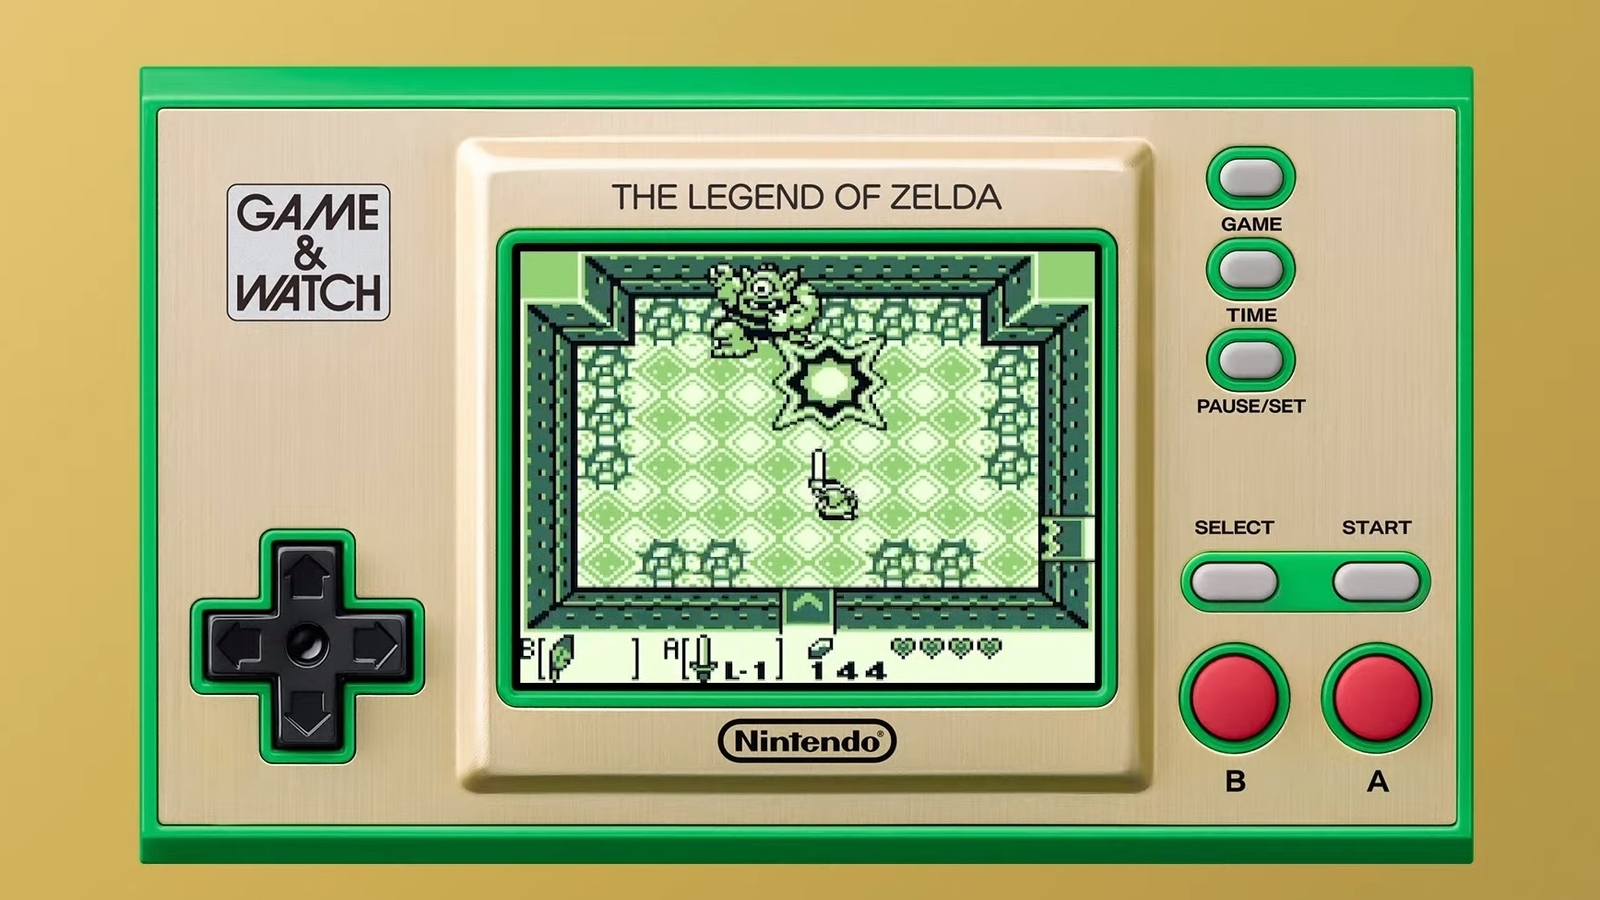 Very excited for the new Zelda Game & Watch coming out in November